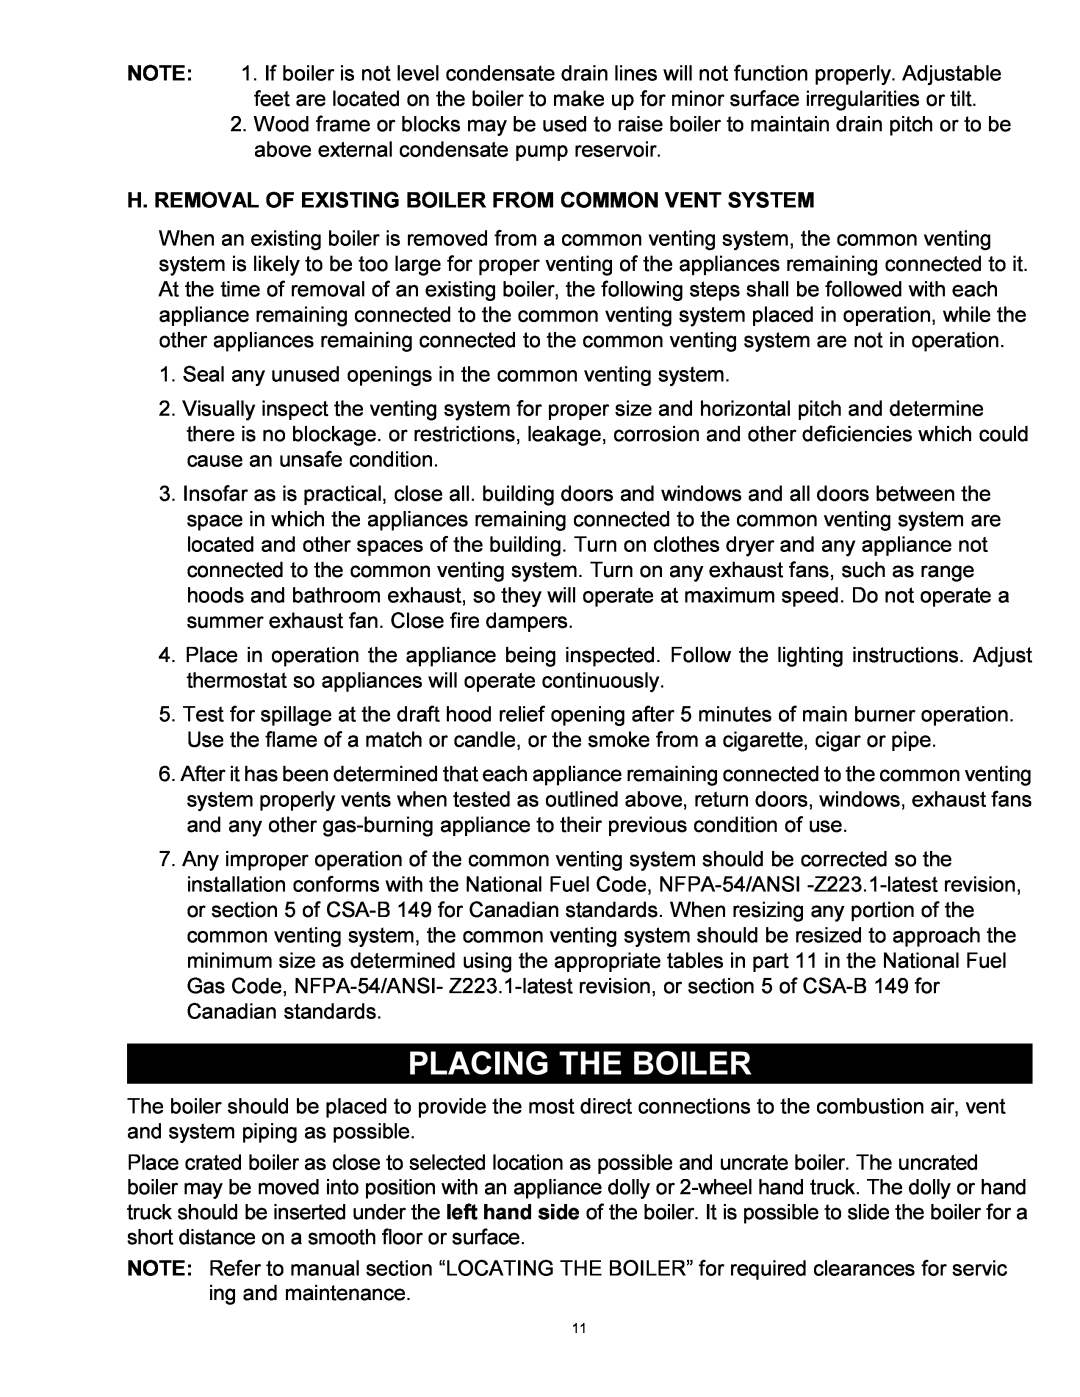 Quantum GAS-FIRED BOILERS installation instructions Placing The Boiler 